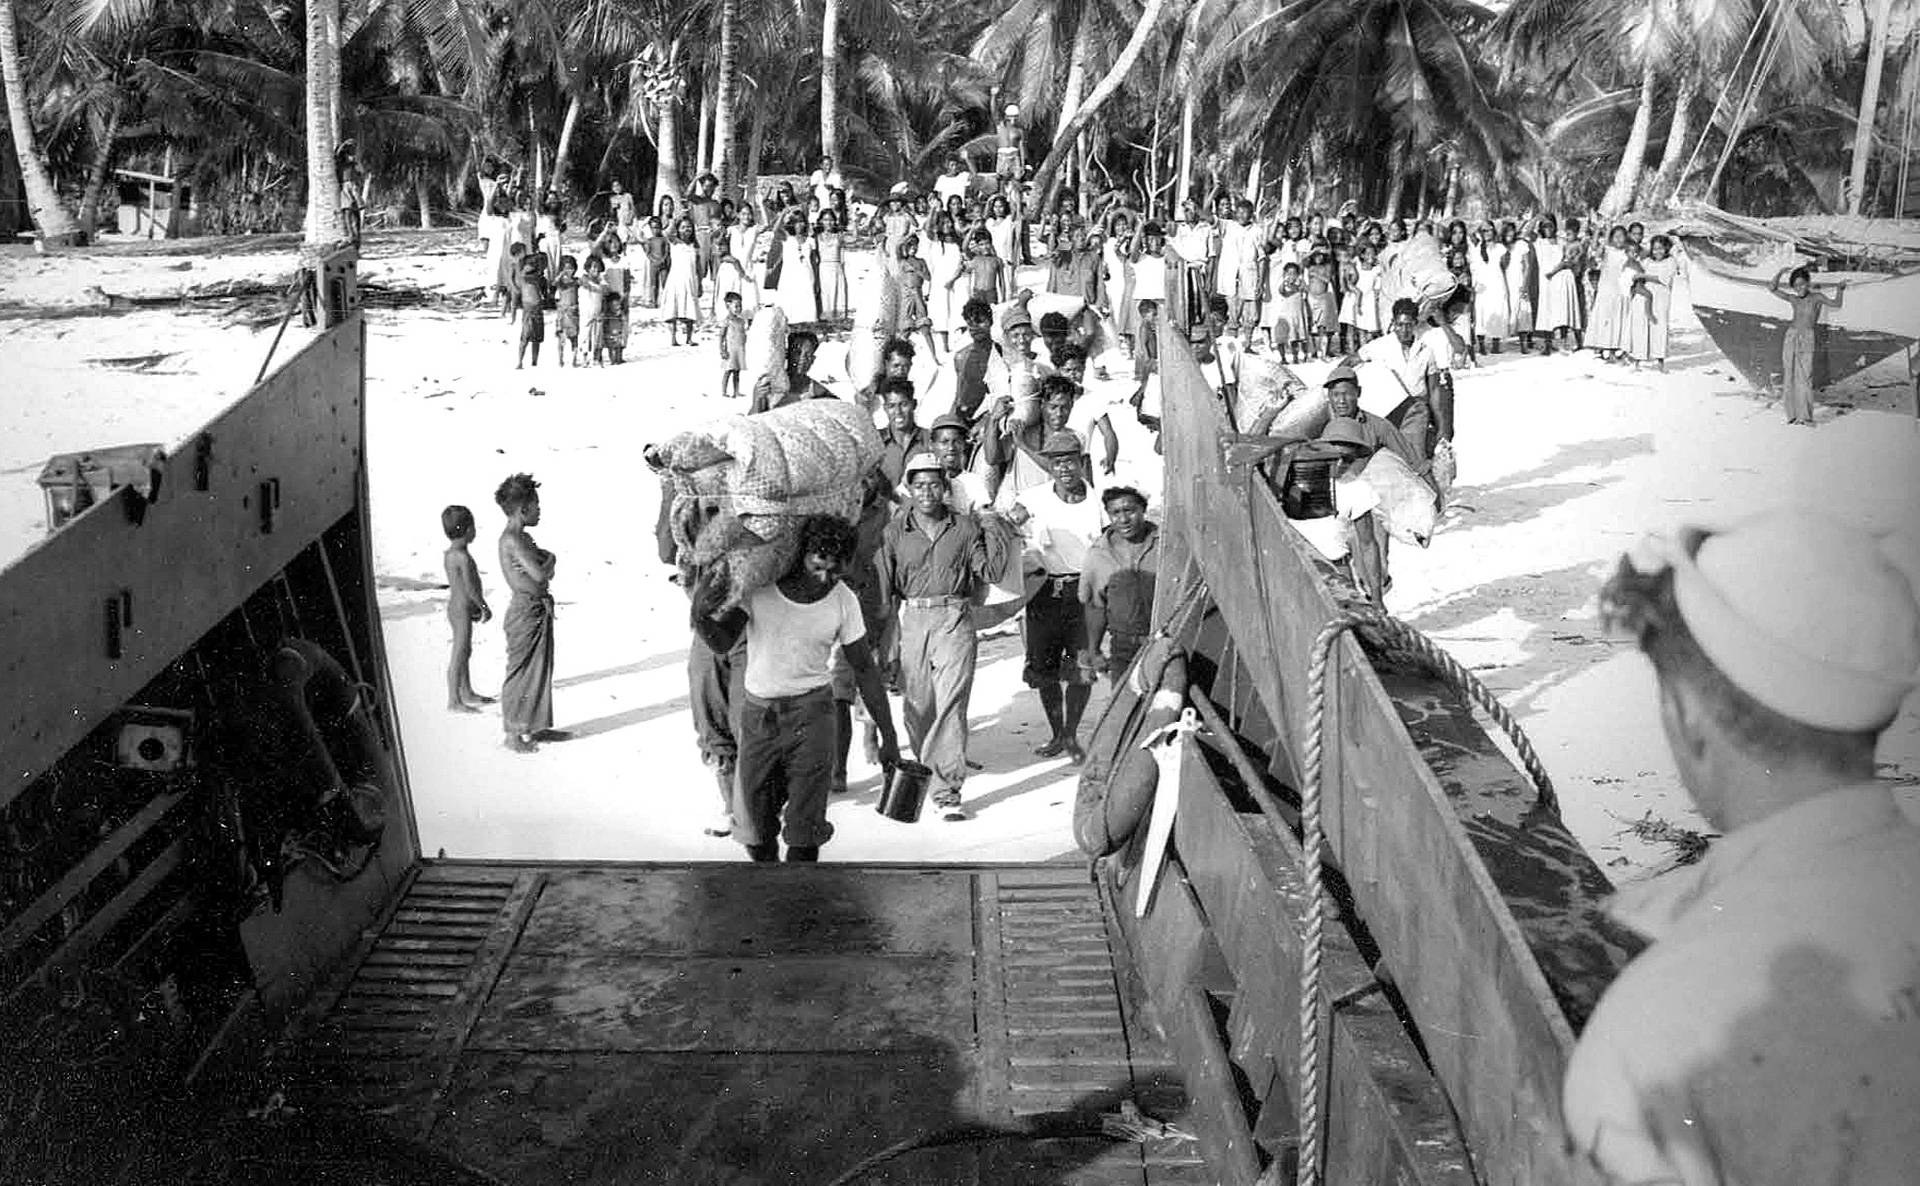 Marshallese evacuate from their island of Bikini in 1946, in advance of nuclear weapons testing. National Security Archives